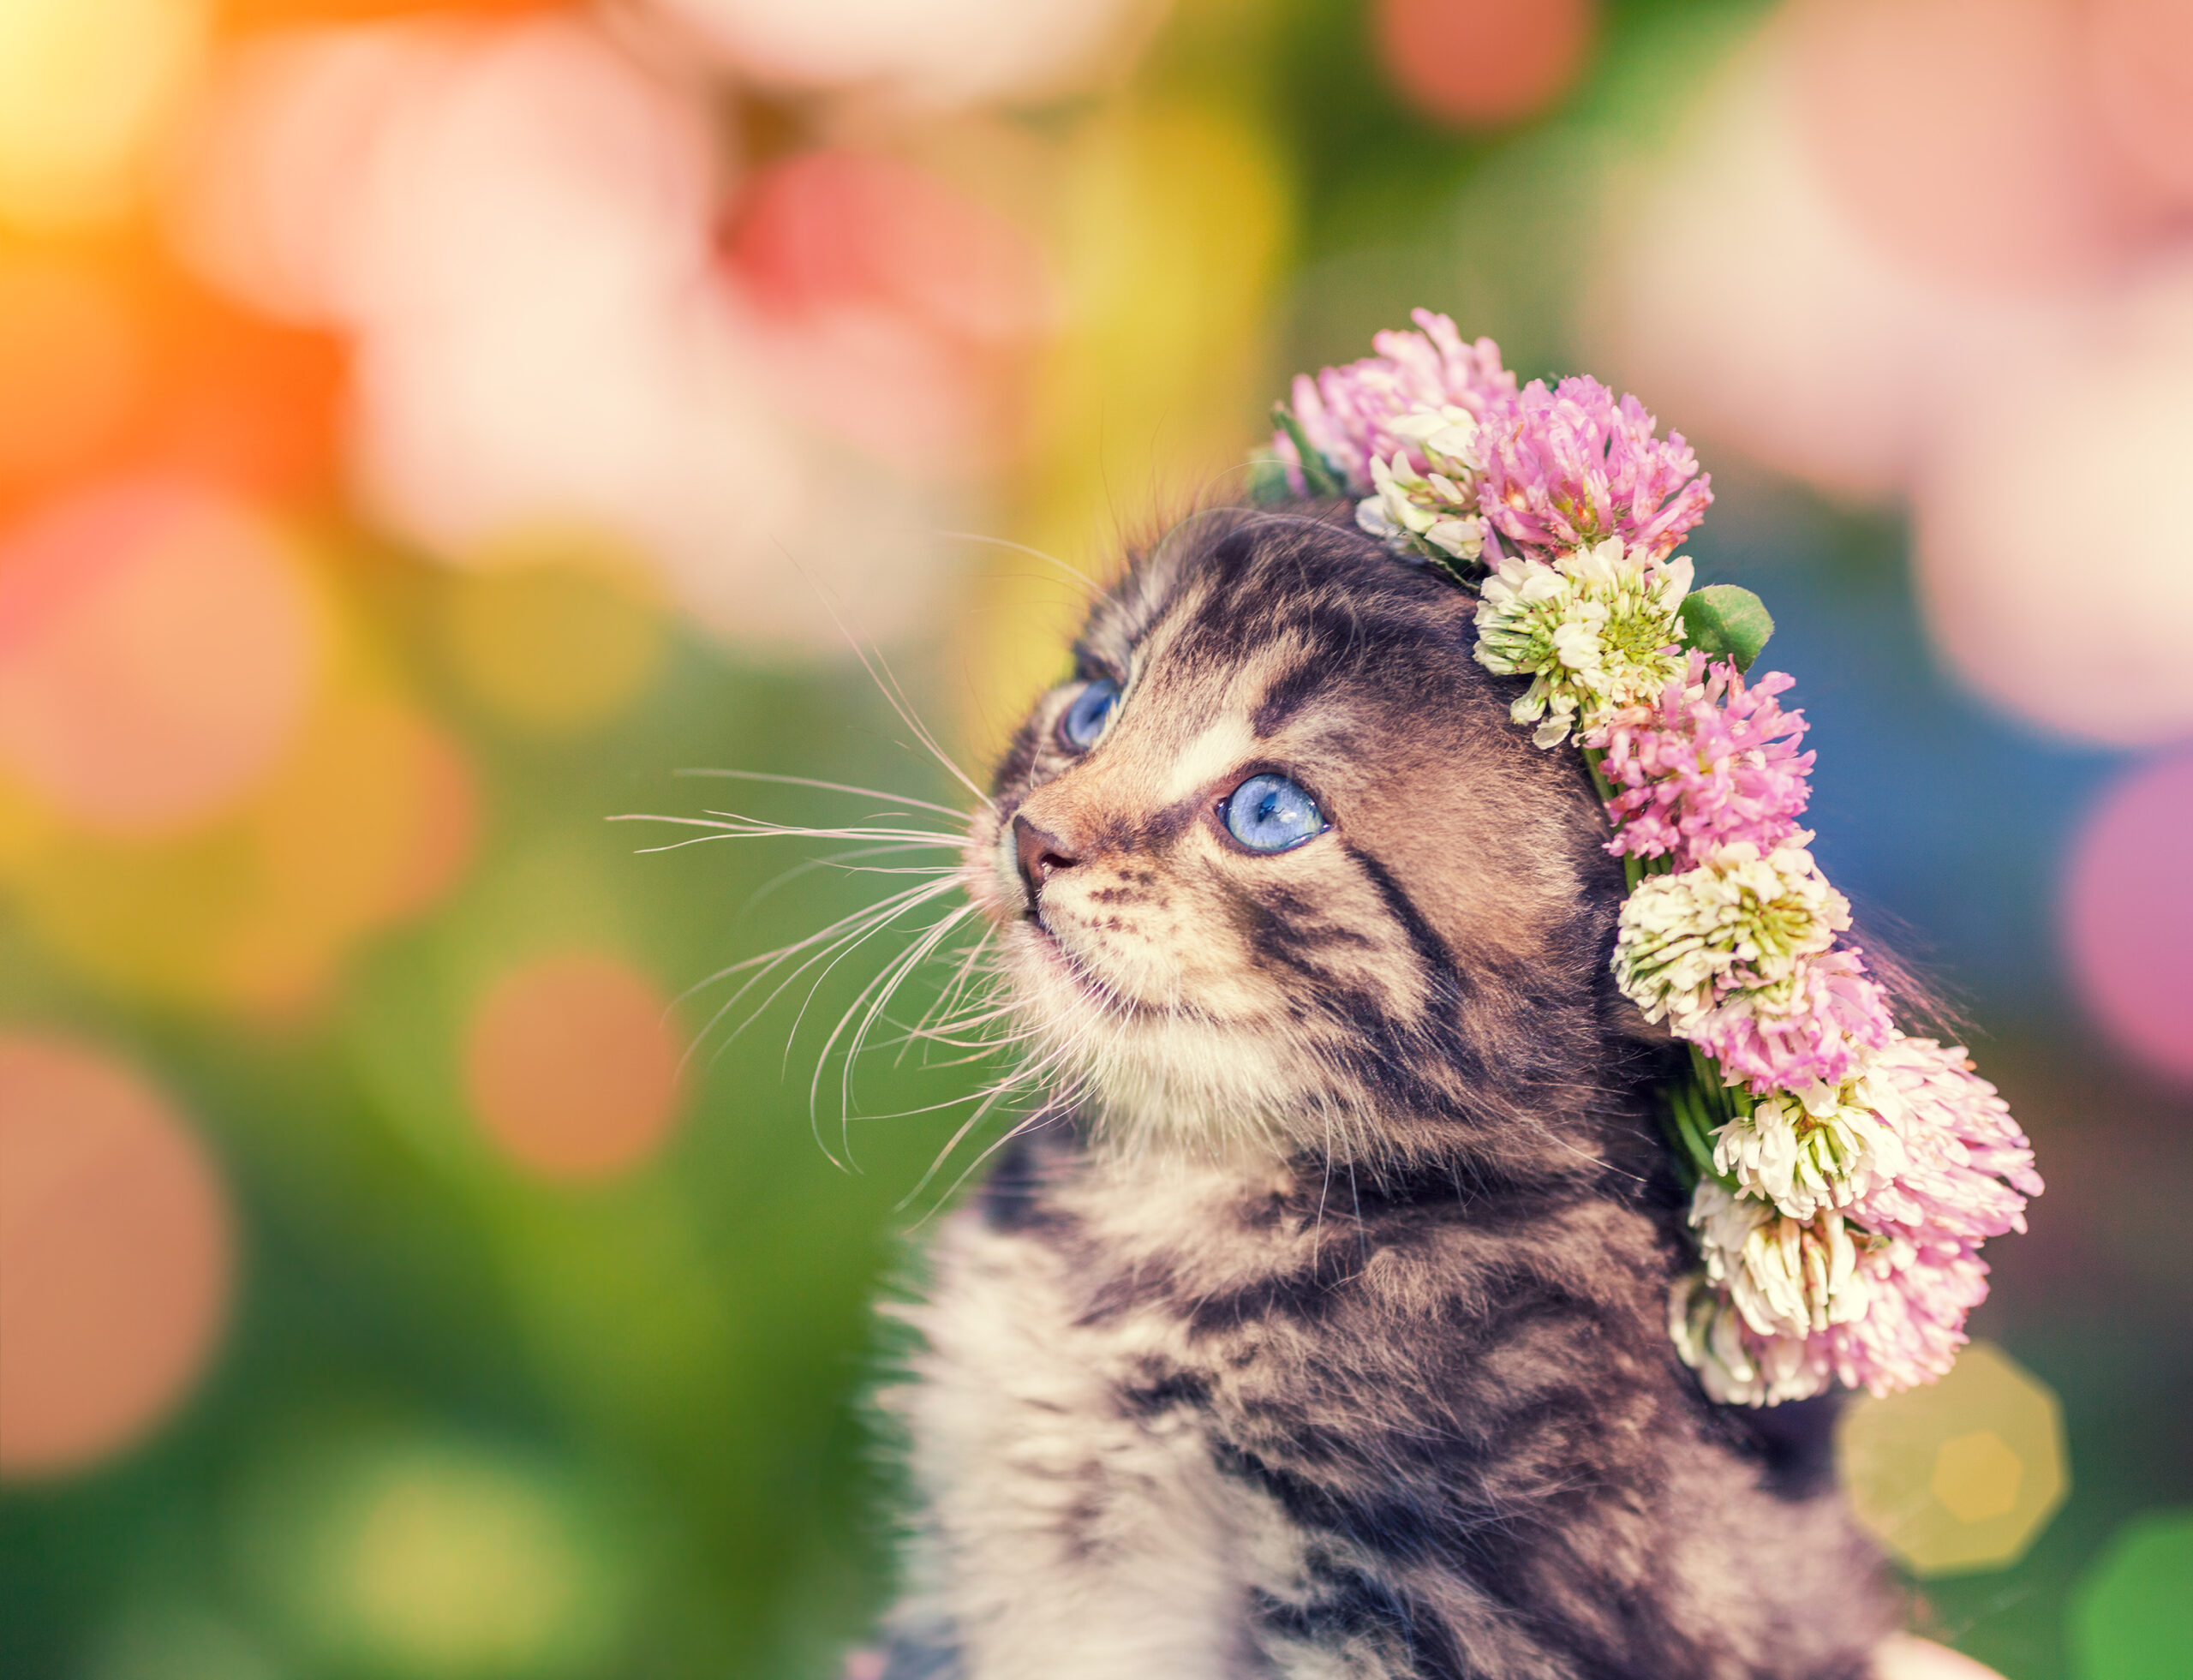 Cute blue eyed kitty with flower crown